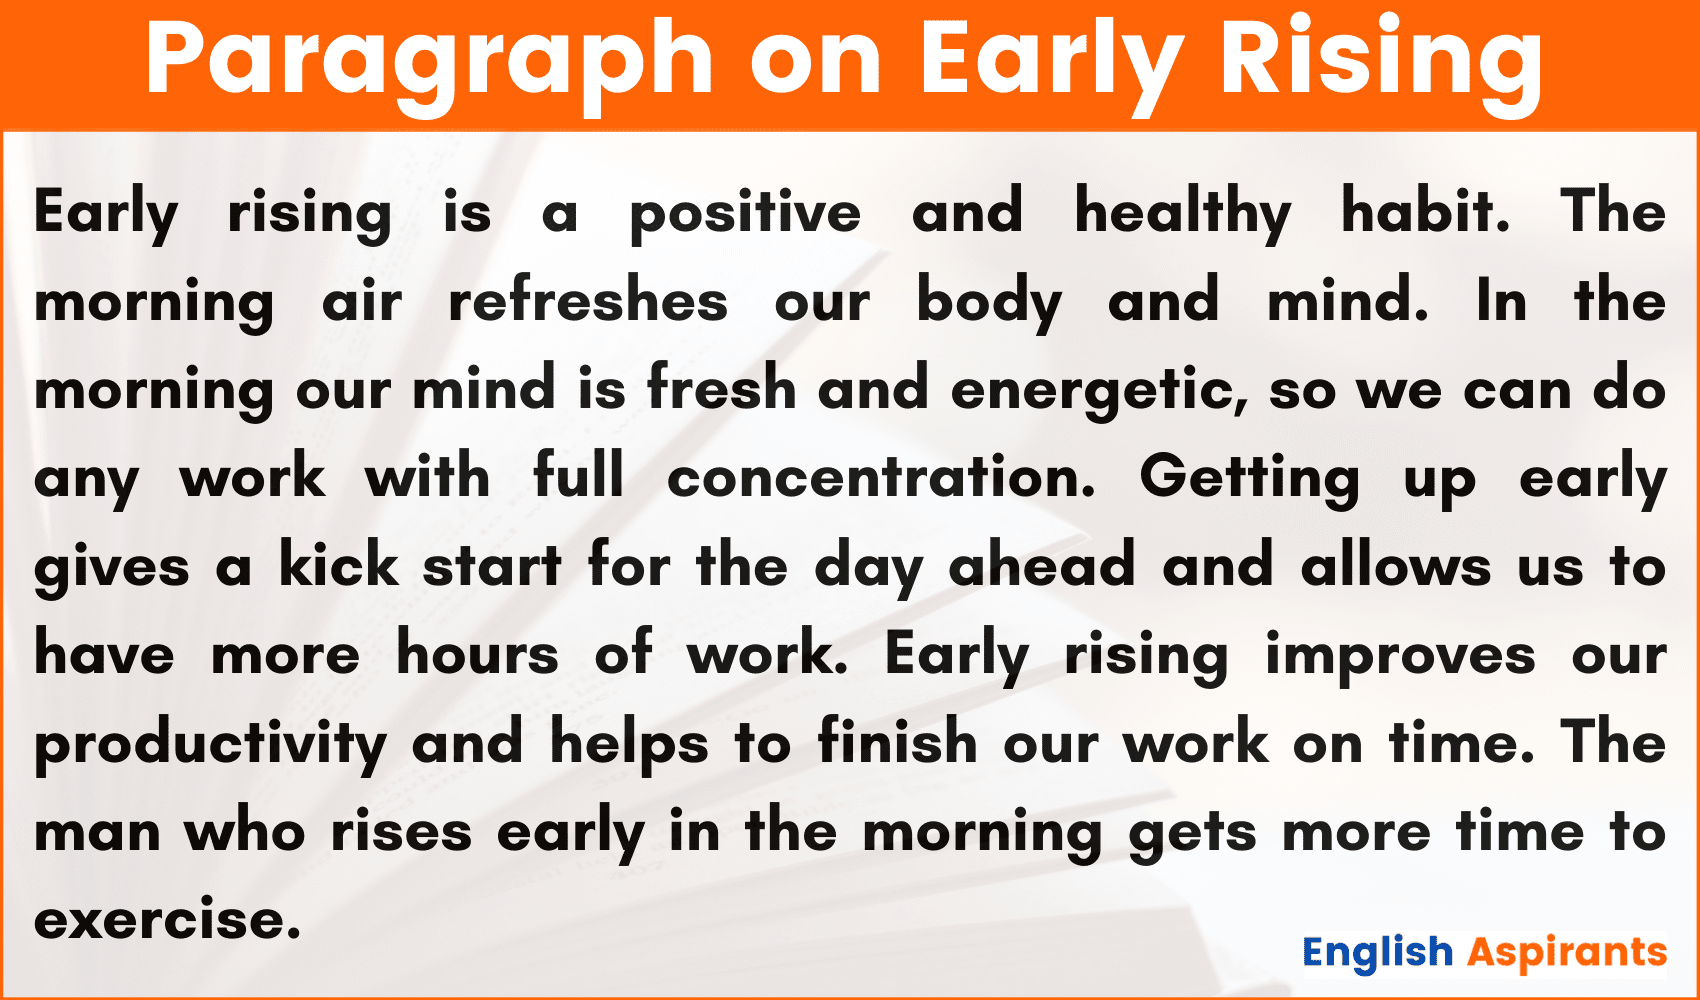 Paragraph on Early Rising in English